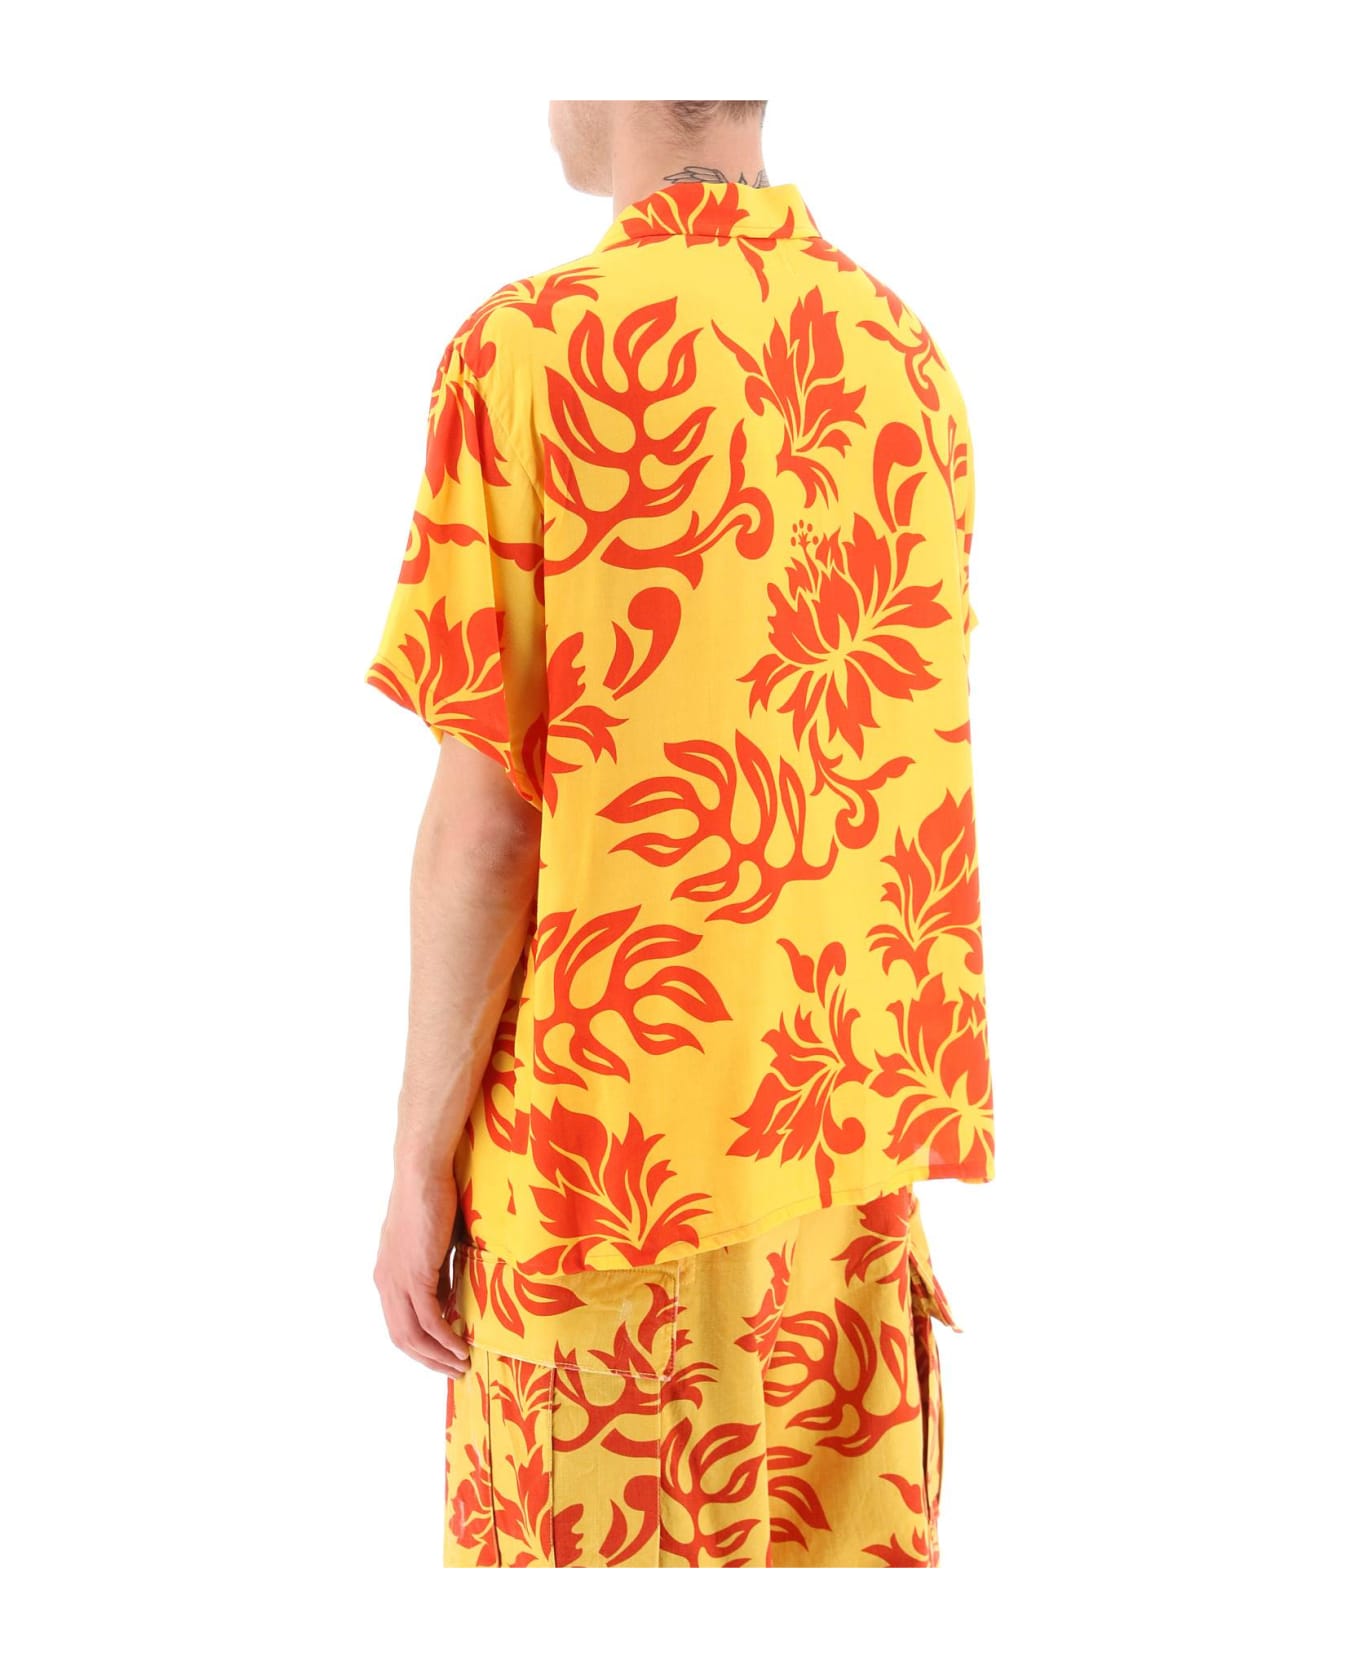 ERL Printed Viscose Bowling Shirt - ERL TROPICAL FLOWERS 1 (Yellow)